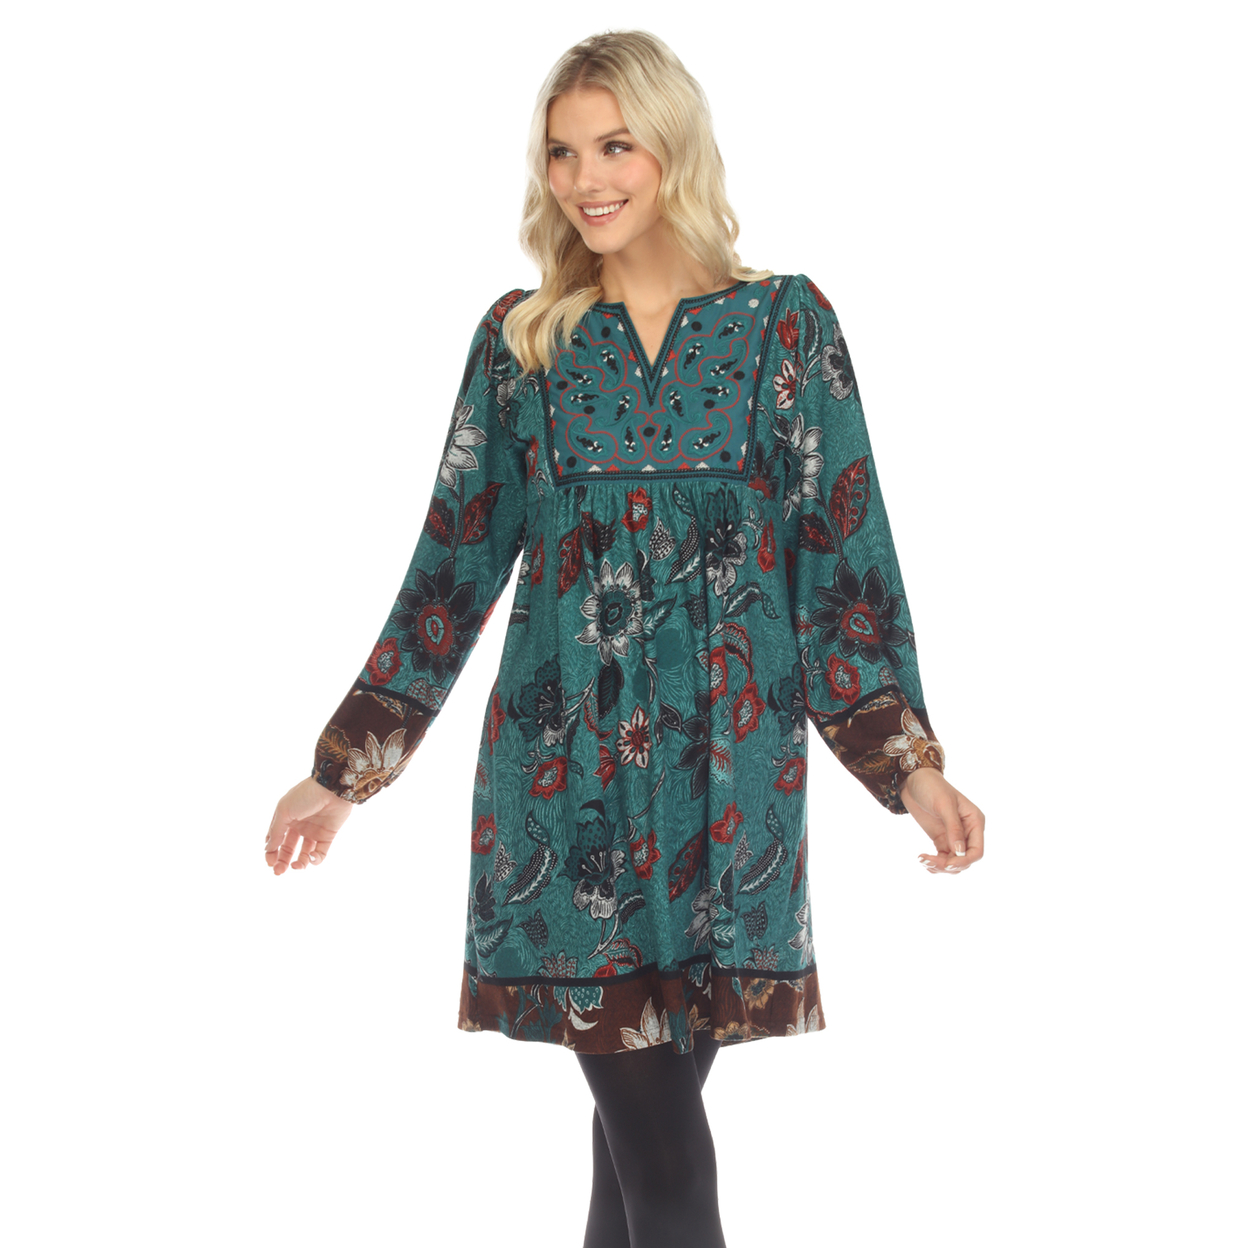 White Mark Women's Floral Paisley Sweater Dress - Teal, Small